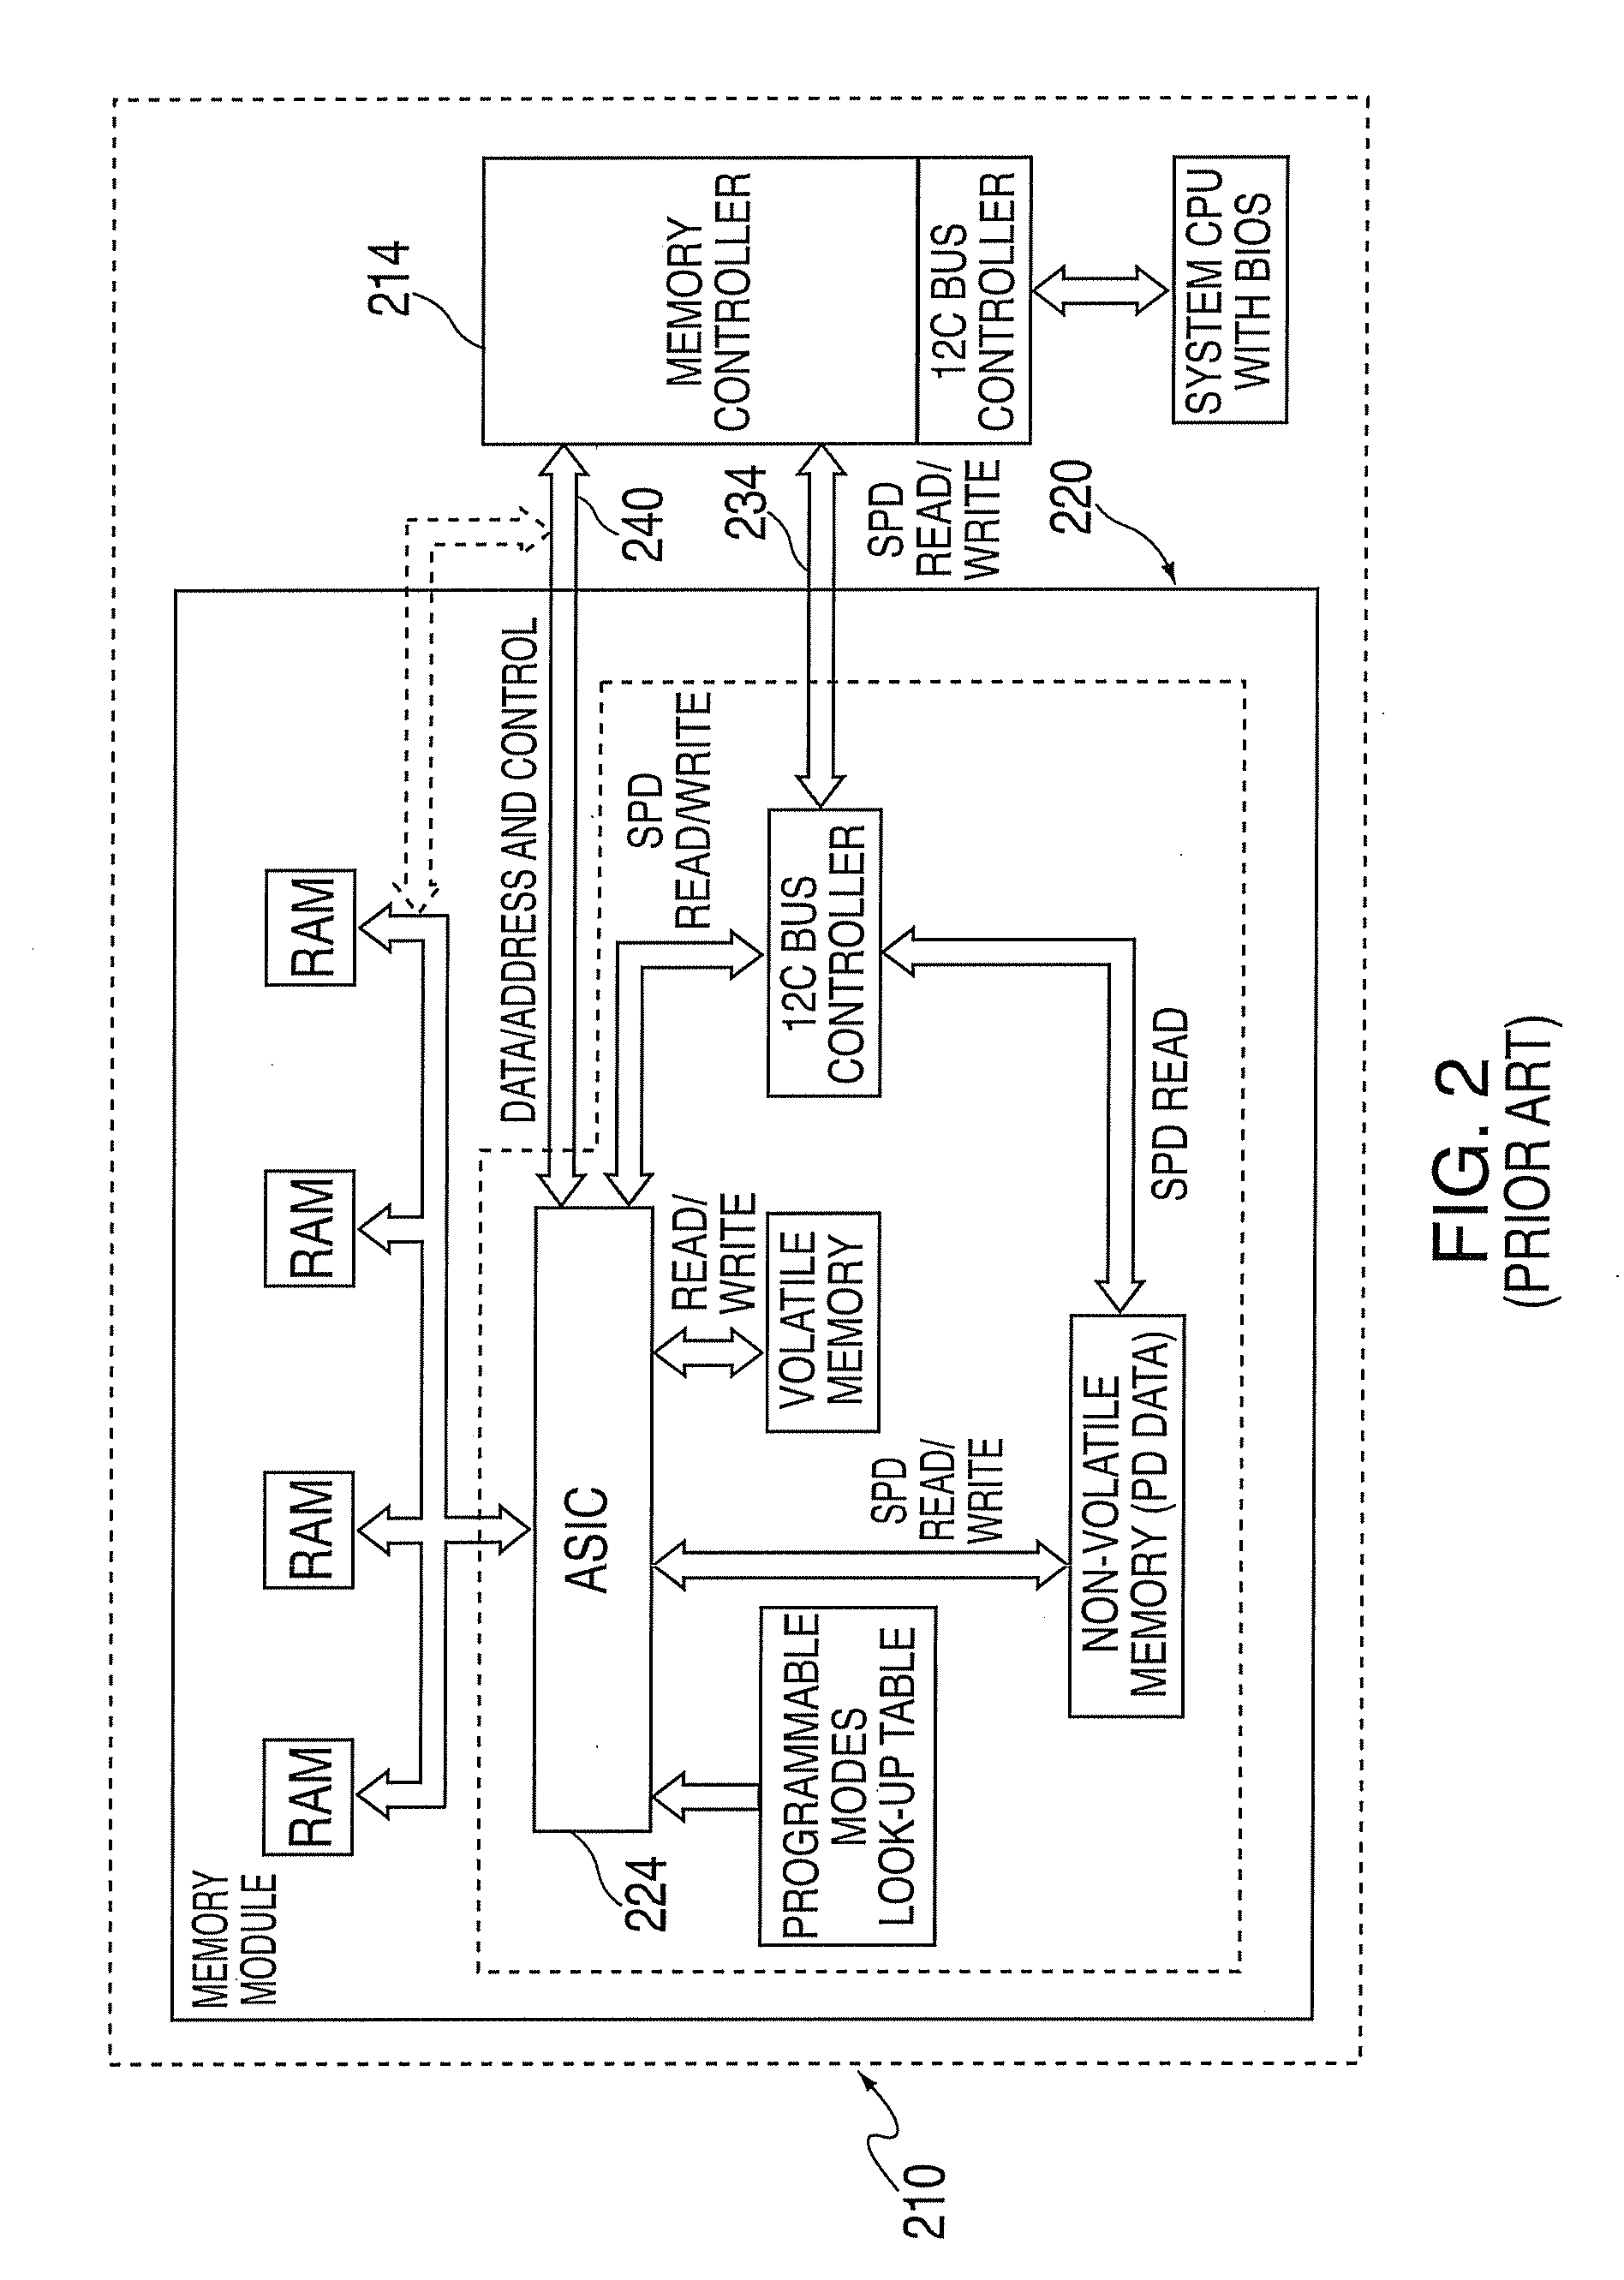 System and method for providing a configurable command sequence for a memory interface device